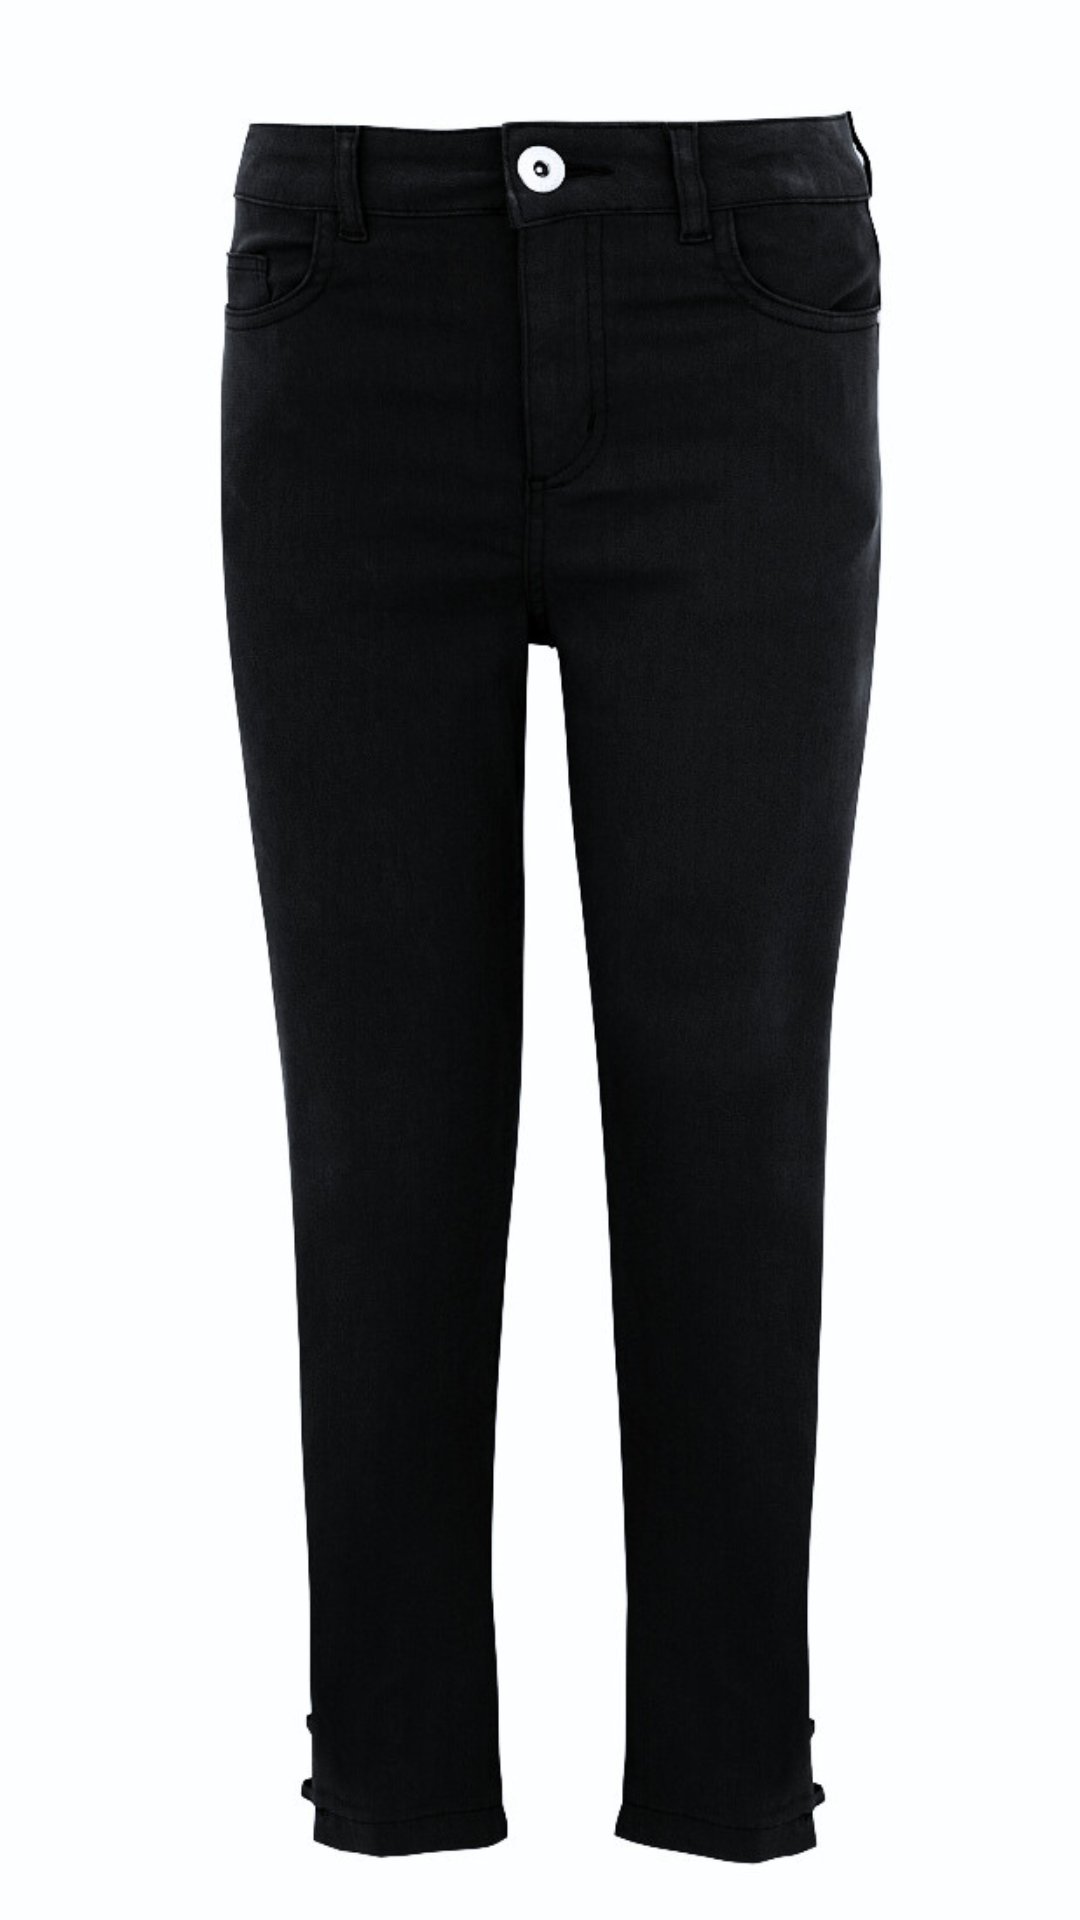 Ladder Cut Ankle Detail Pant. Style DOLC23202